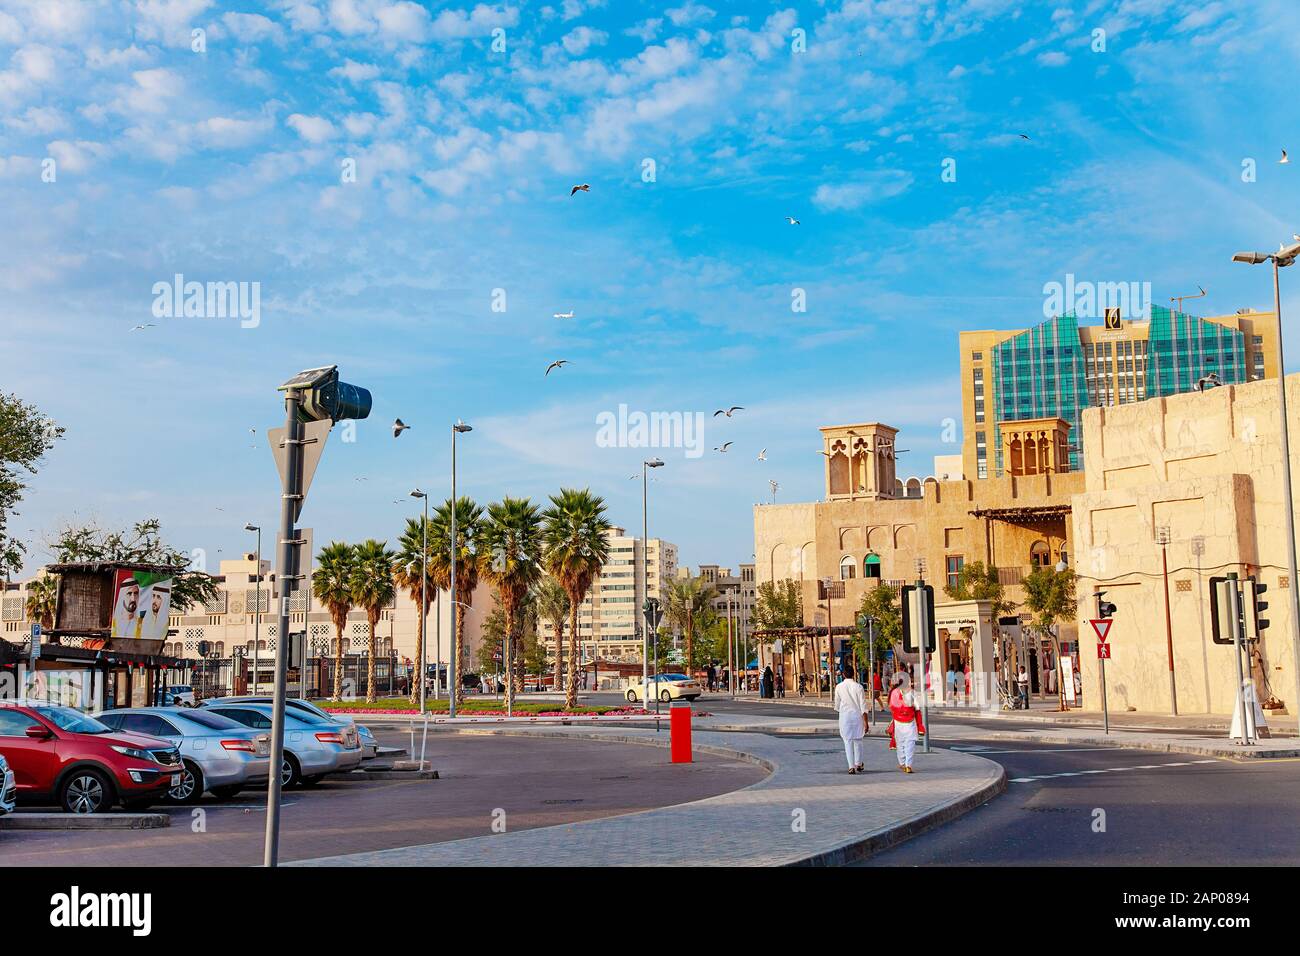 Emirates city walk road sunset buildings view Stock Photo